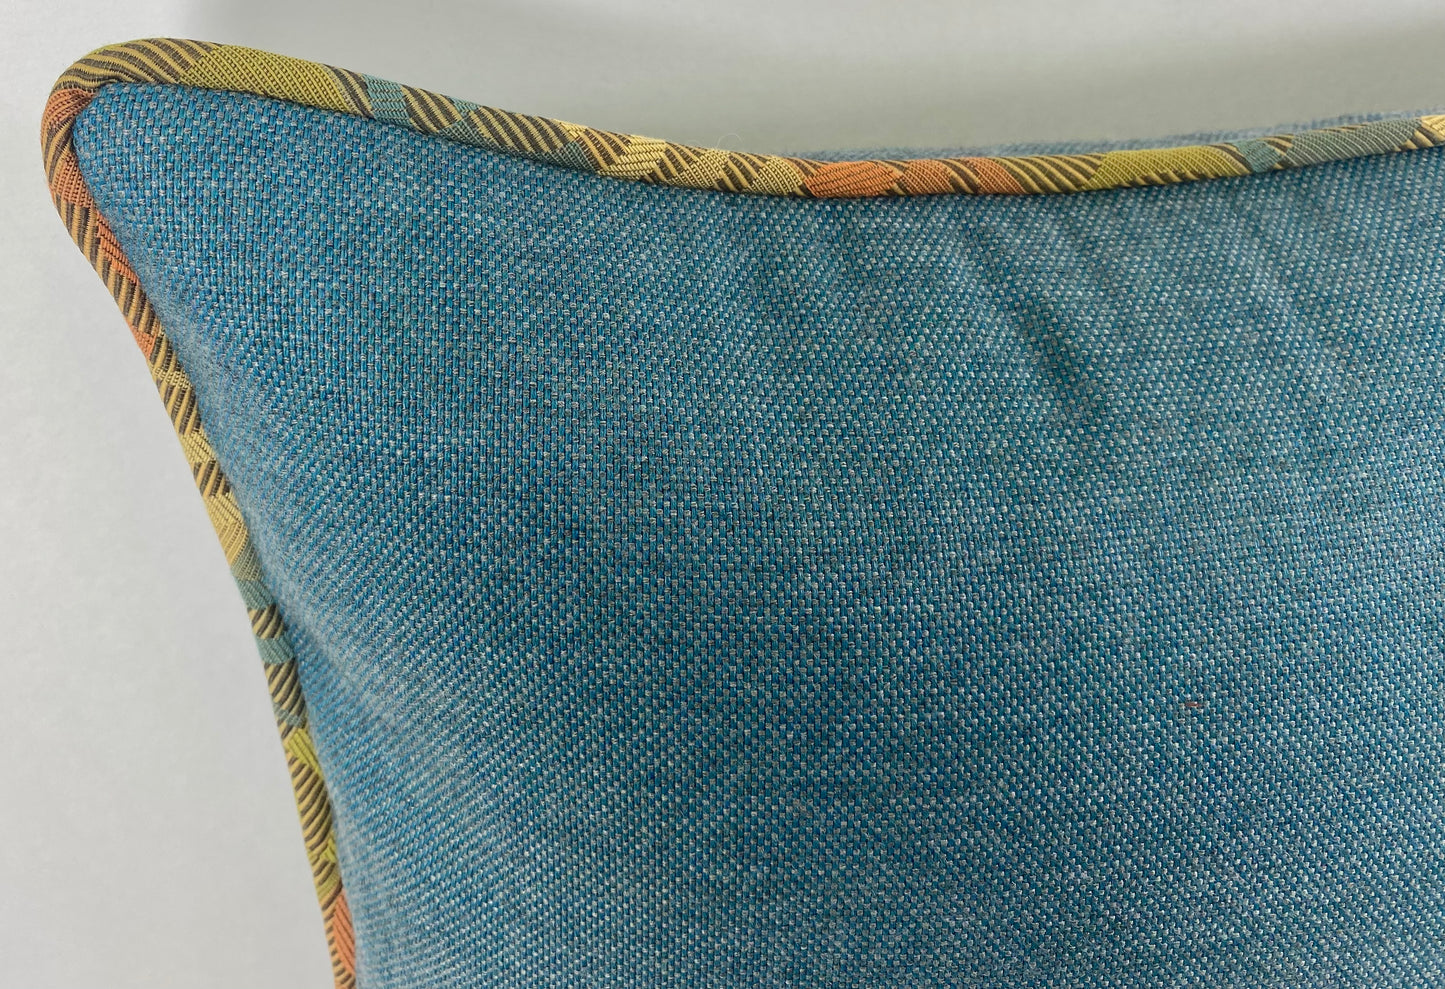 Luxury Outdoor Pillow - 22" x 22" - Cannes-Denim; Sunbrella, or equivalent, fabric with poly fill